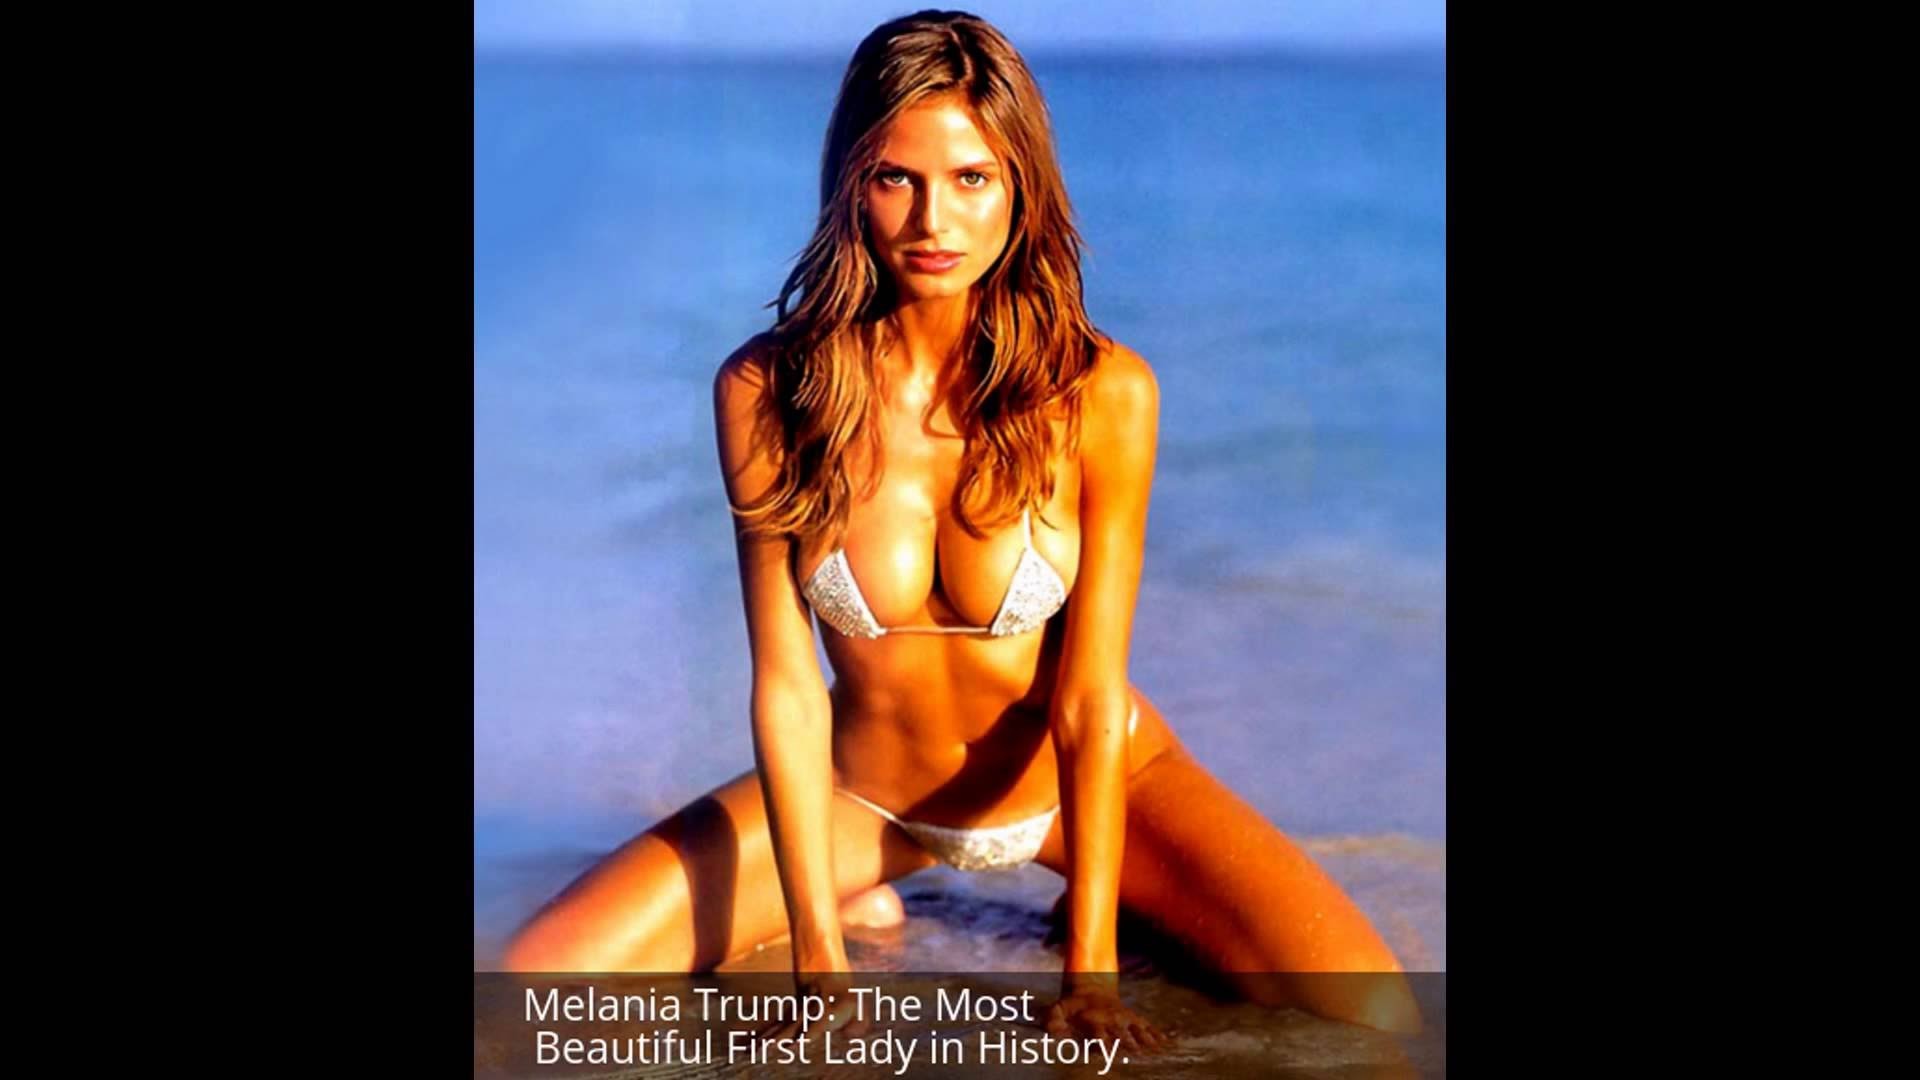 President Donald Trumps Wife Melania The Most Beautiful First Lady In History. – YouTube